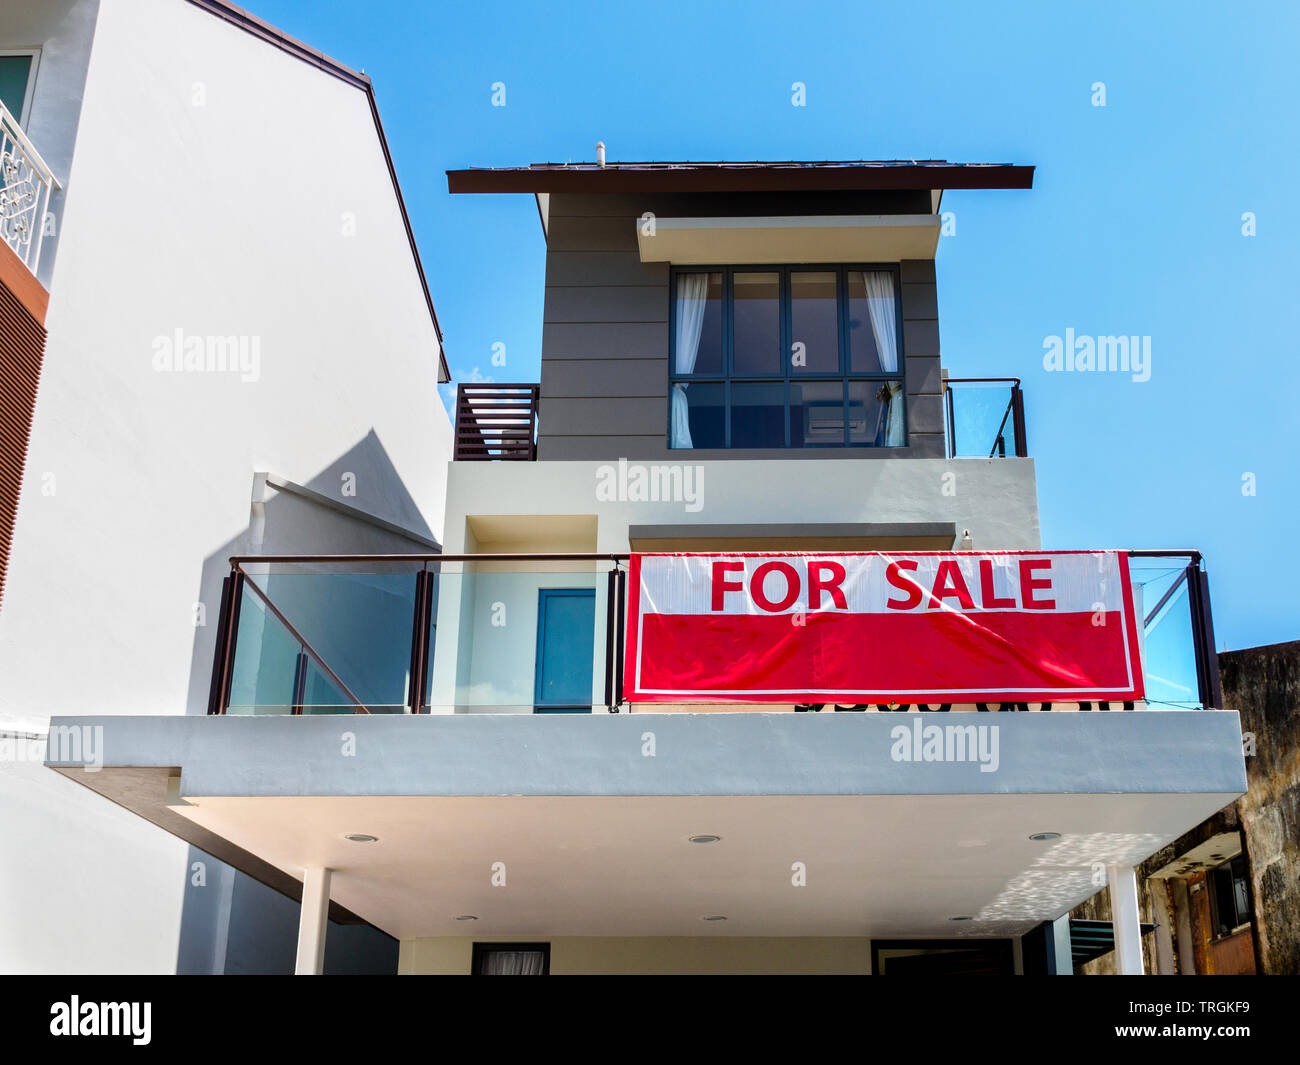 SINGAPORE, 15 MARCH 2019 - Low angle view front view of a house with red 'for sale' sign. Stock Photo